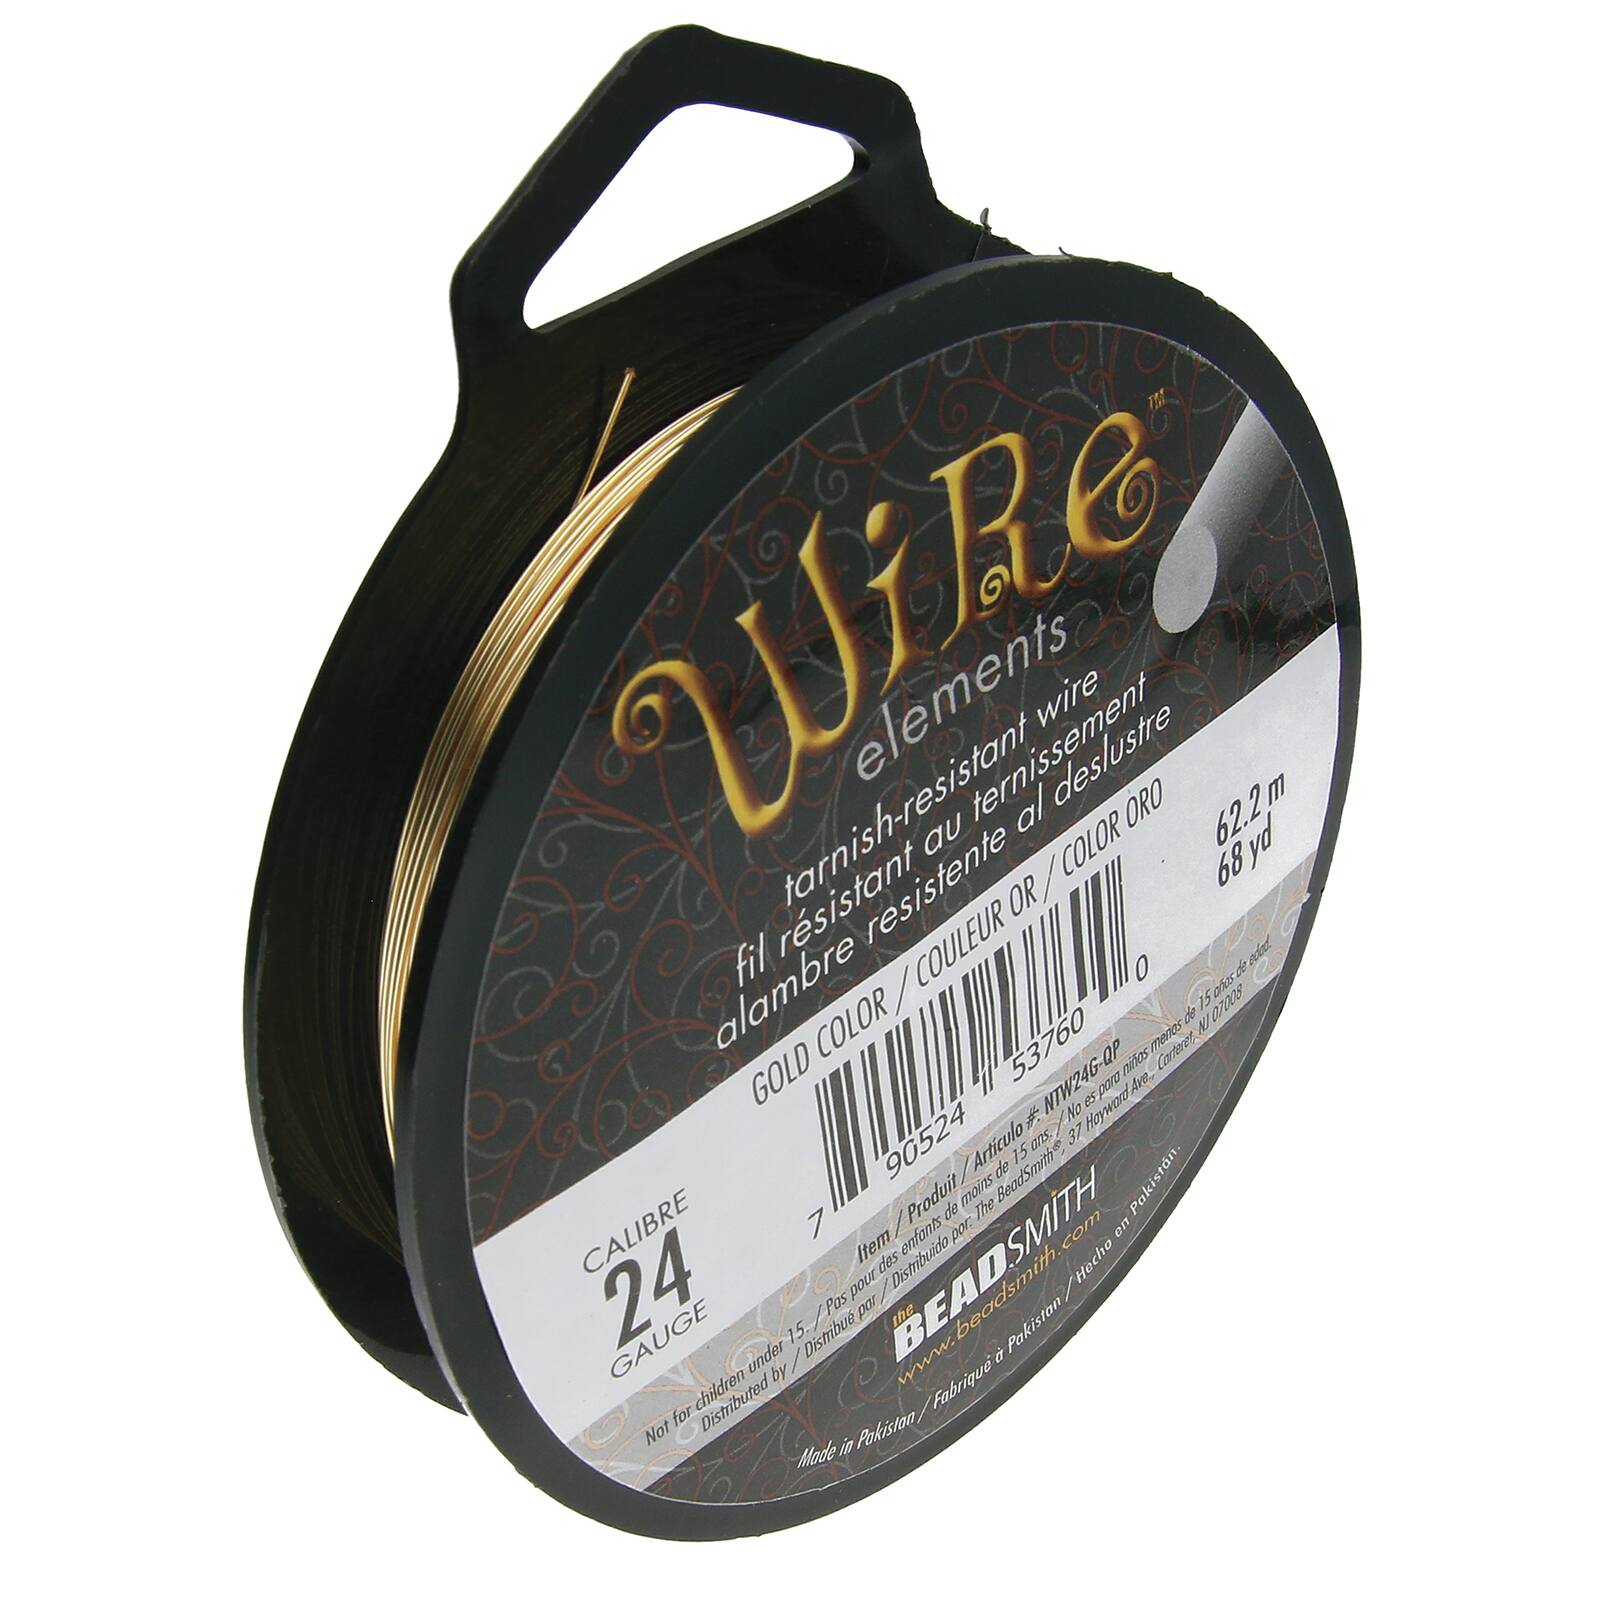 The Beadsmith&#xAE; Wire&#x2122; Elements Tarnish-Resistant Wire, 1/4lb.